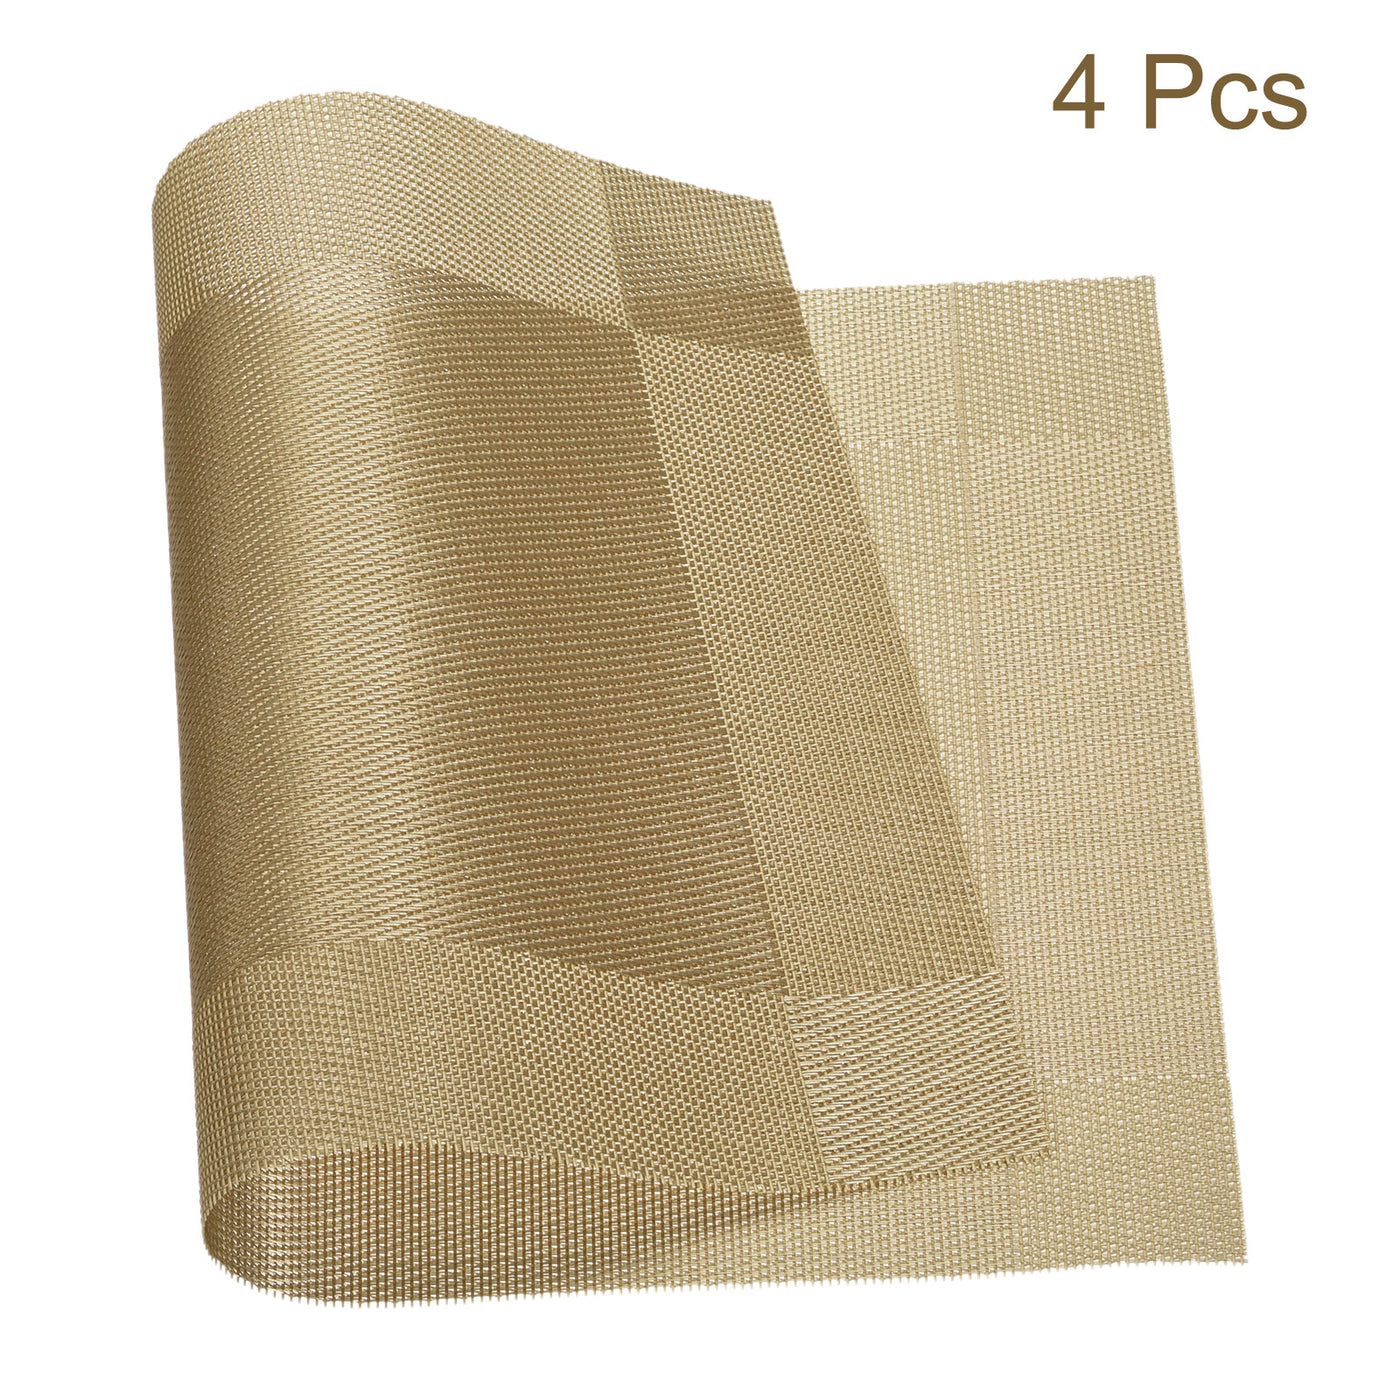 uxcell Uxcell Place Mats 450x300mm 4pcs PVC Table Washable Woven Placemat, Golden